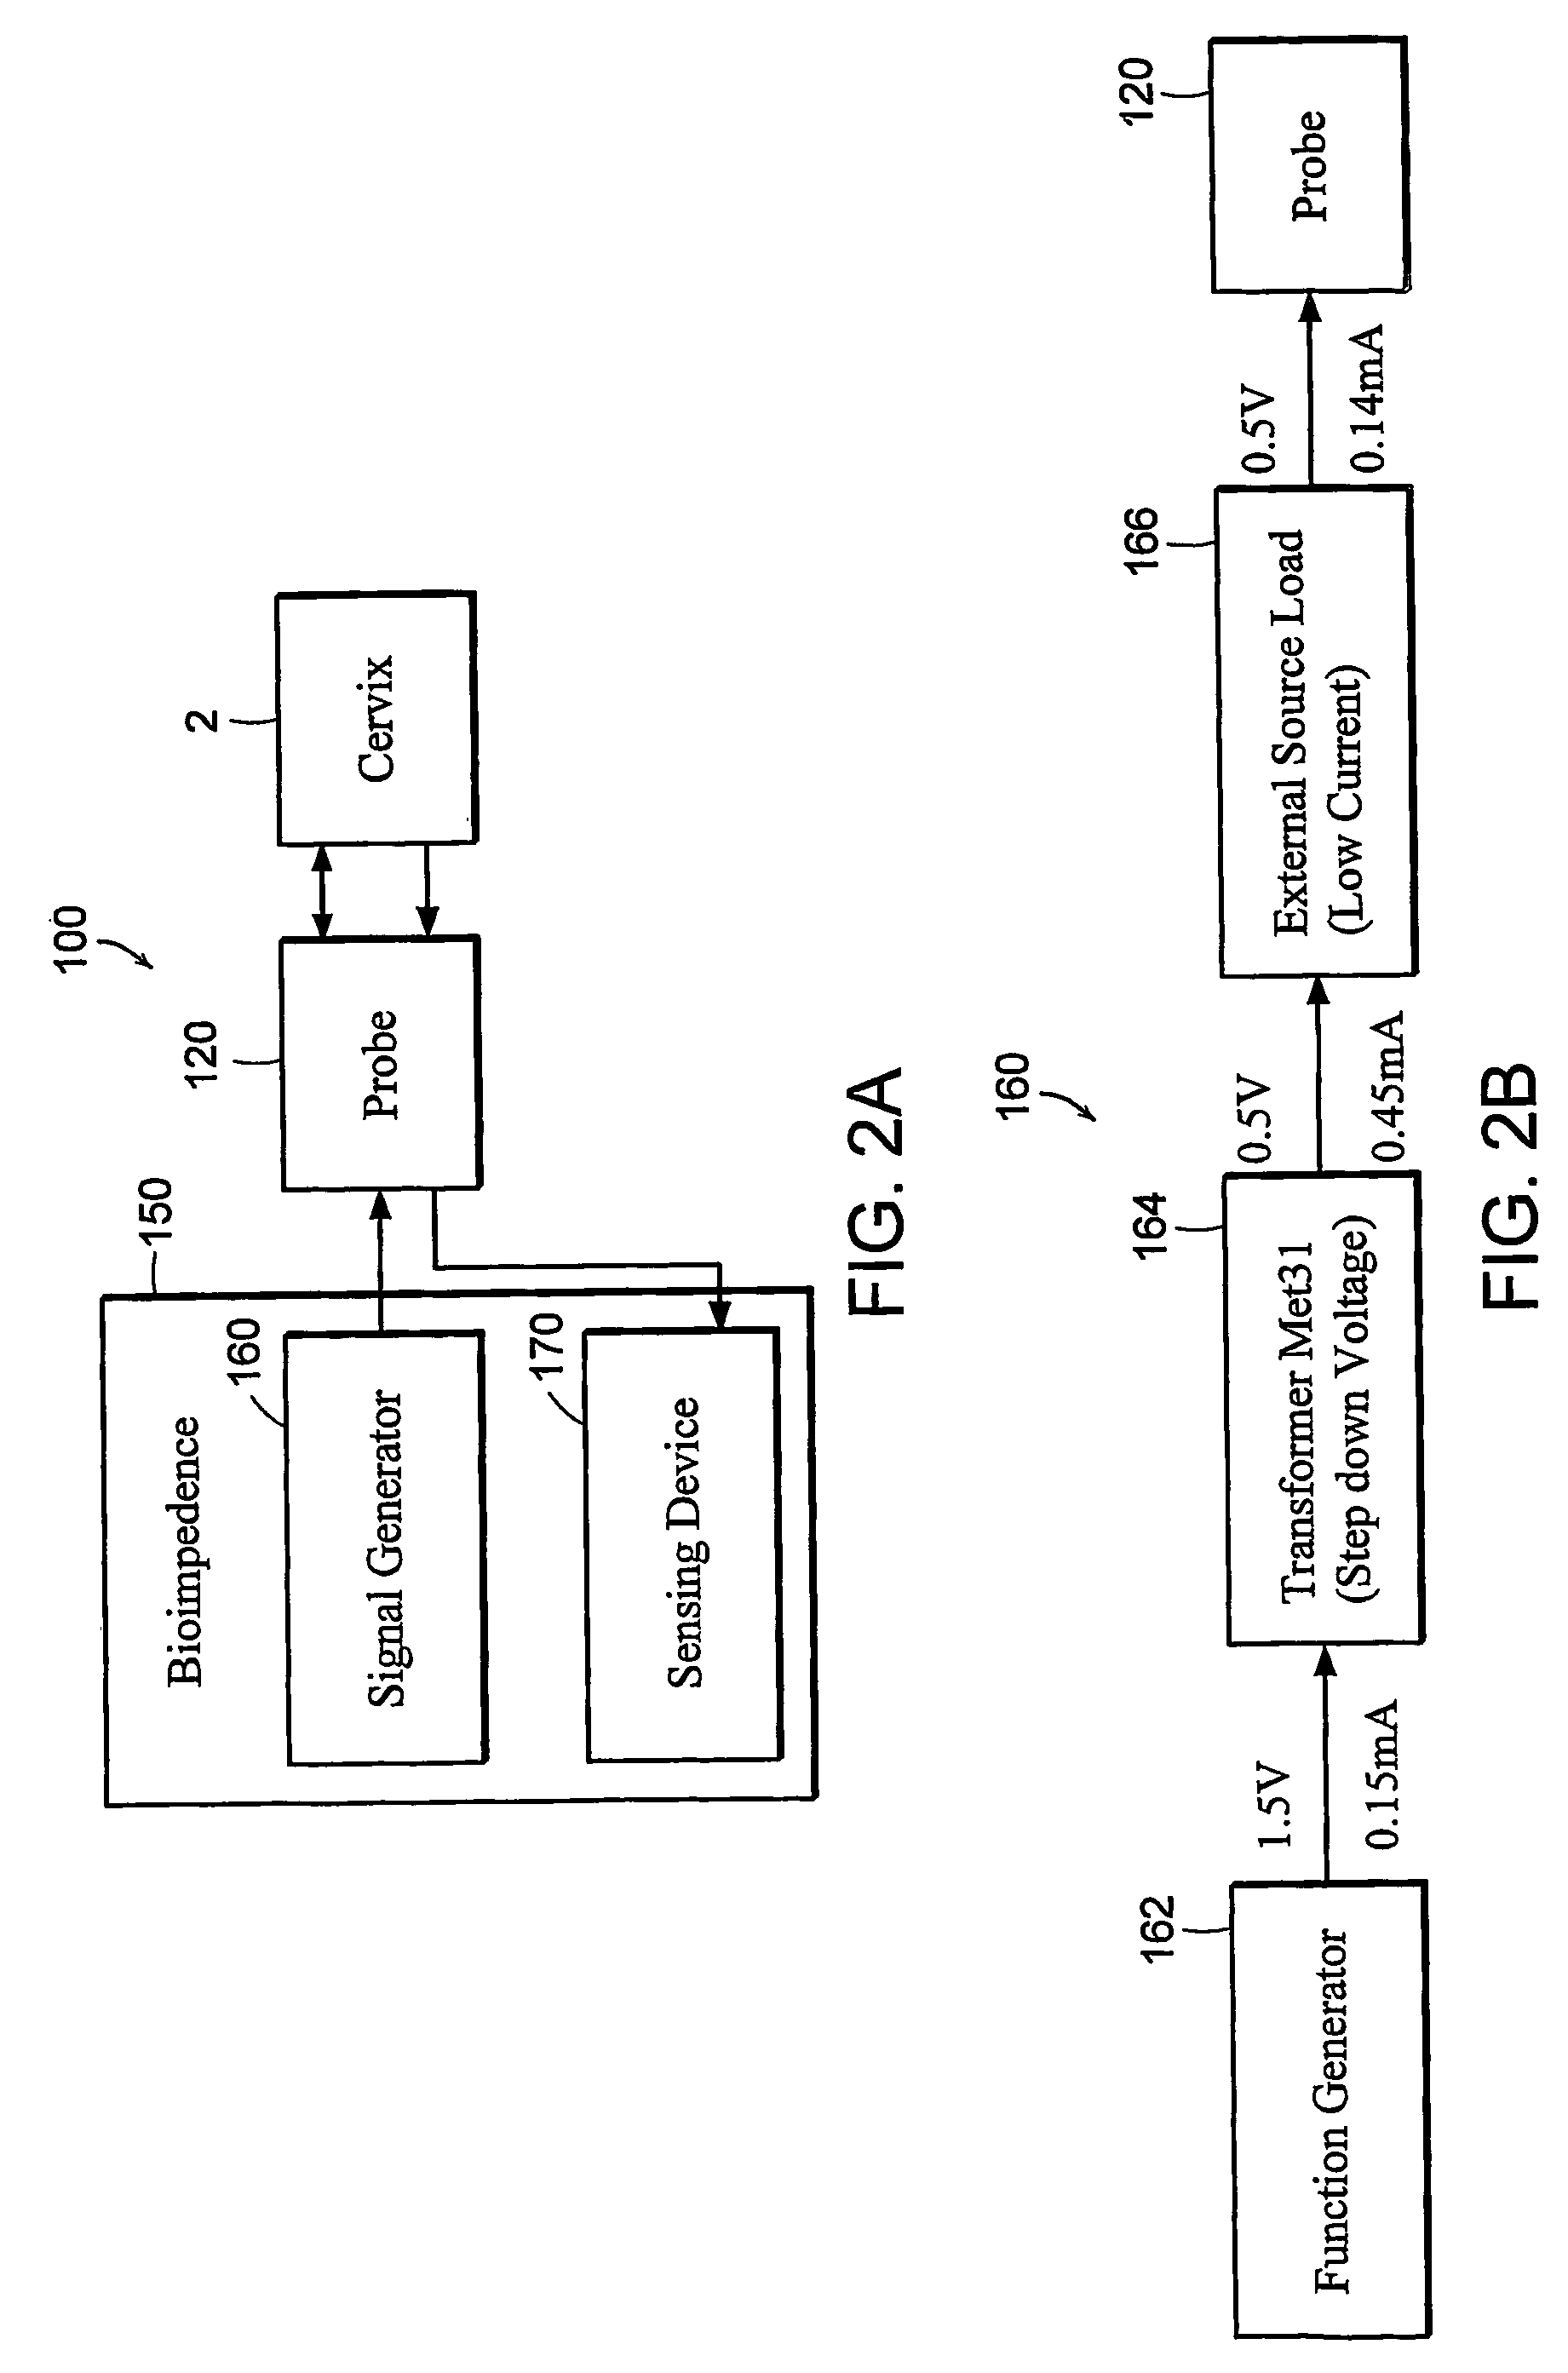 Devices, systems and methods for bioimpedance measurement of cervical tissue and methods for diagnosis and treatment of human cervix